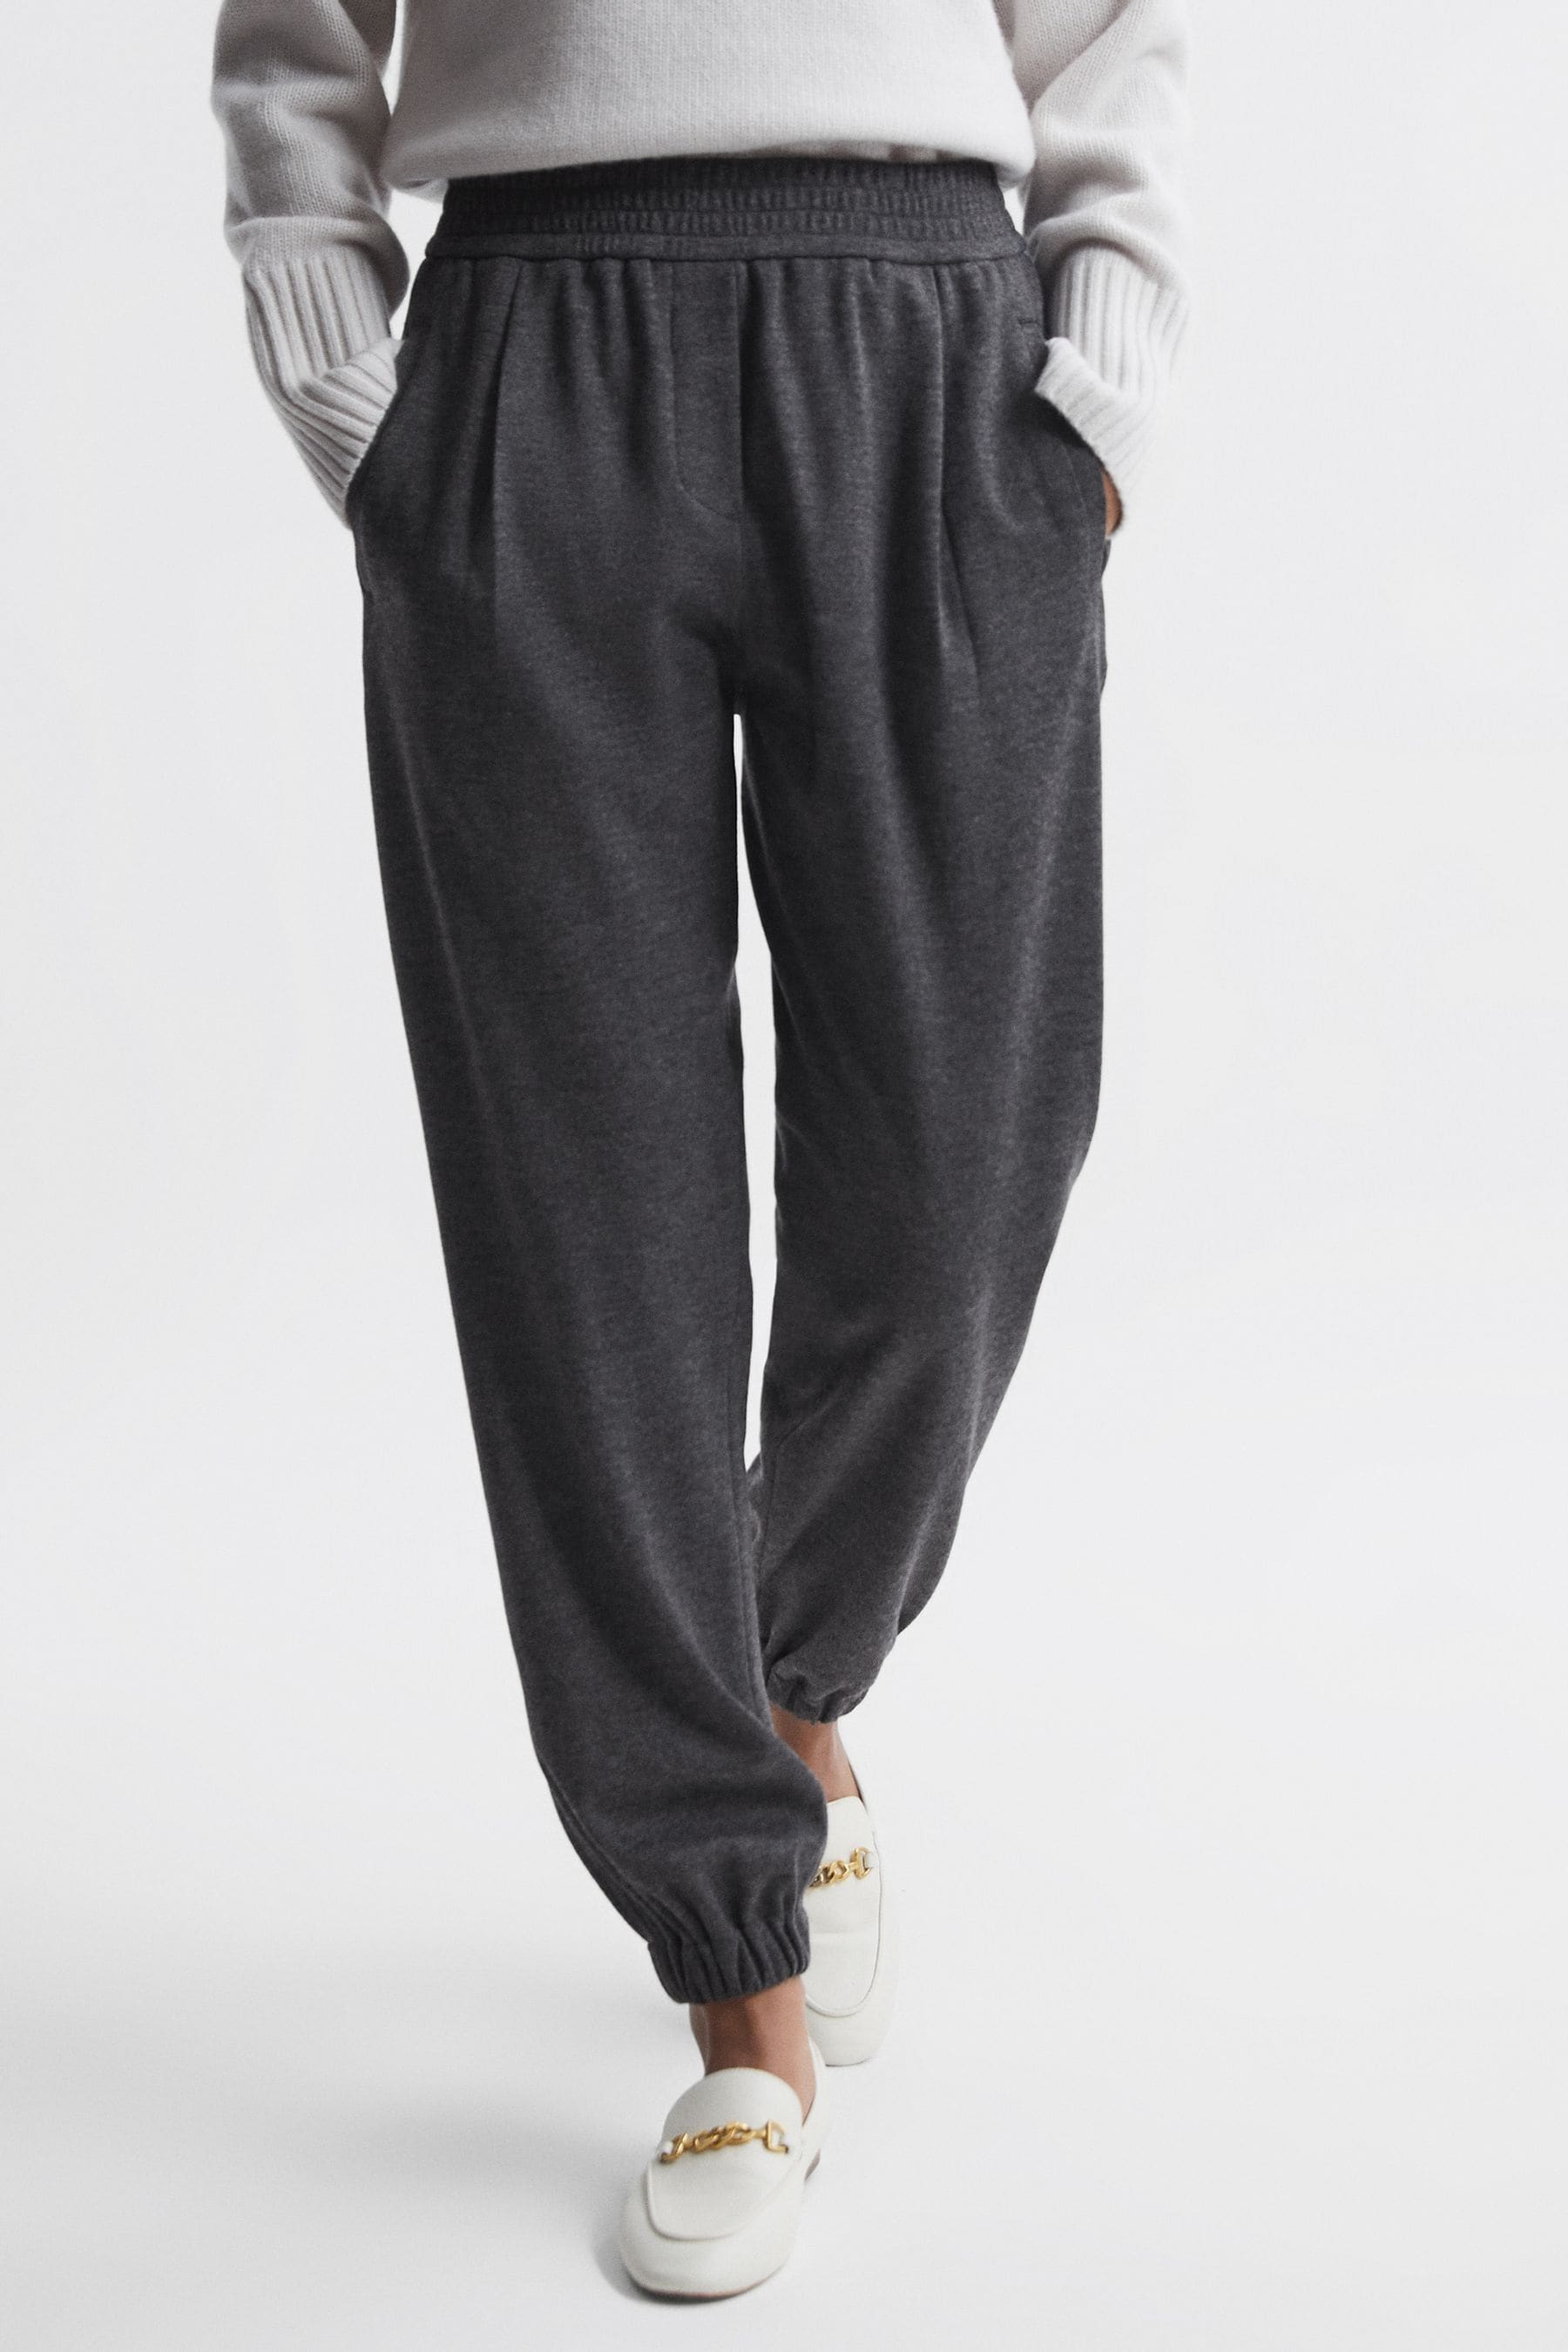 Reiss Karina - Charcoal Wool Elasticated Pleat Front Joggers, Us 2